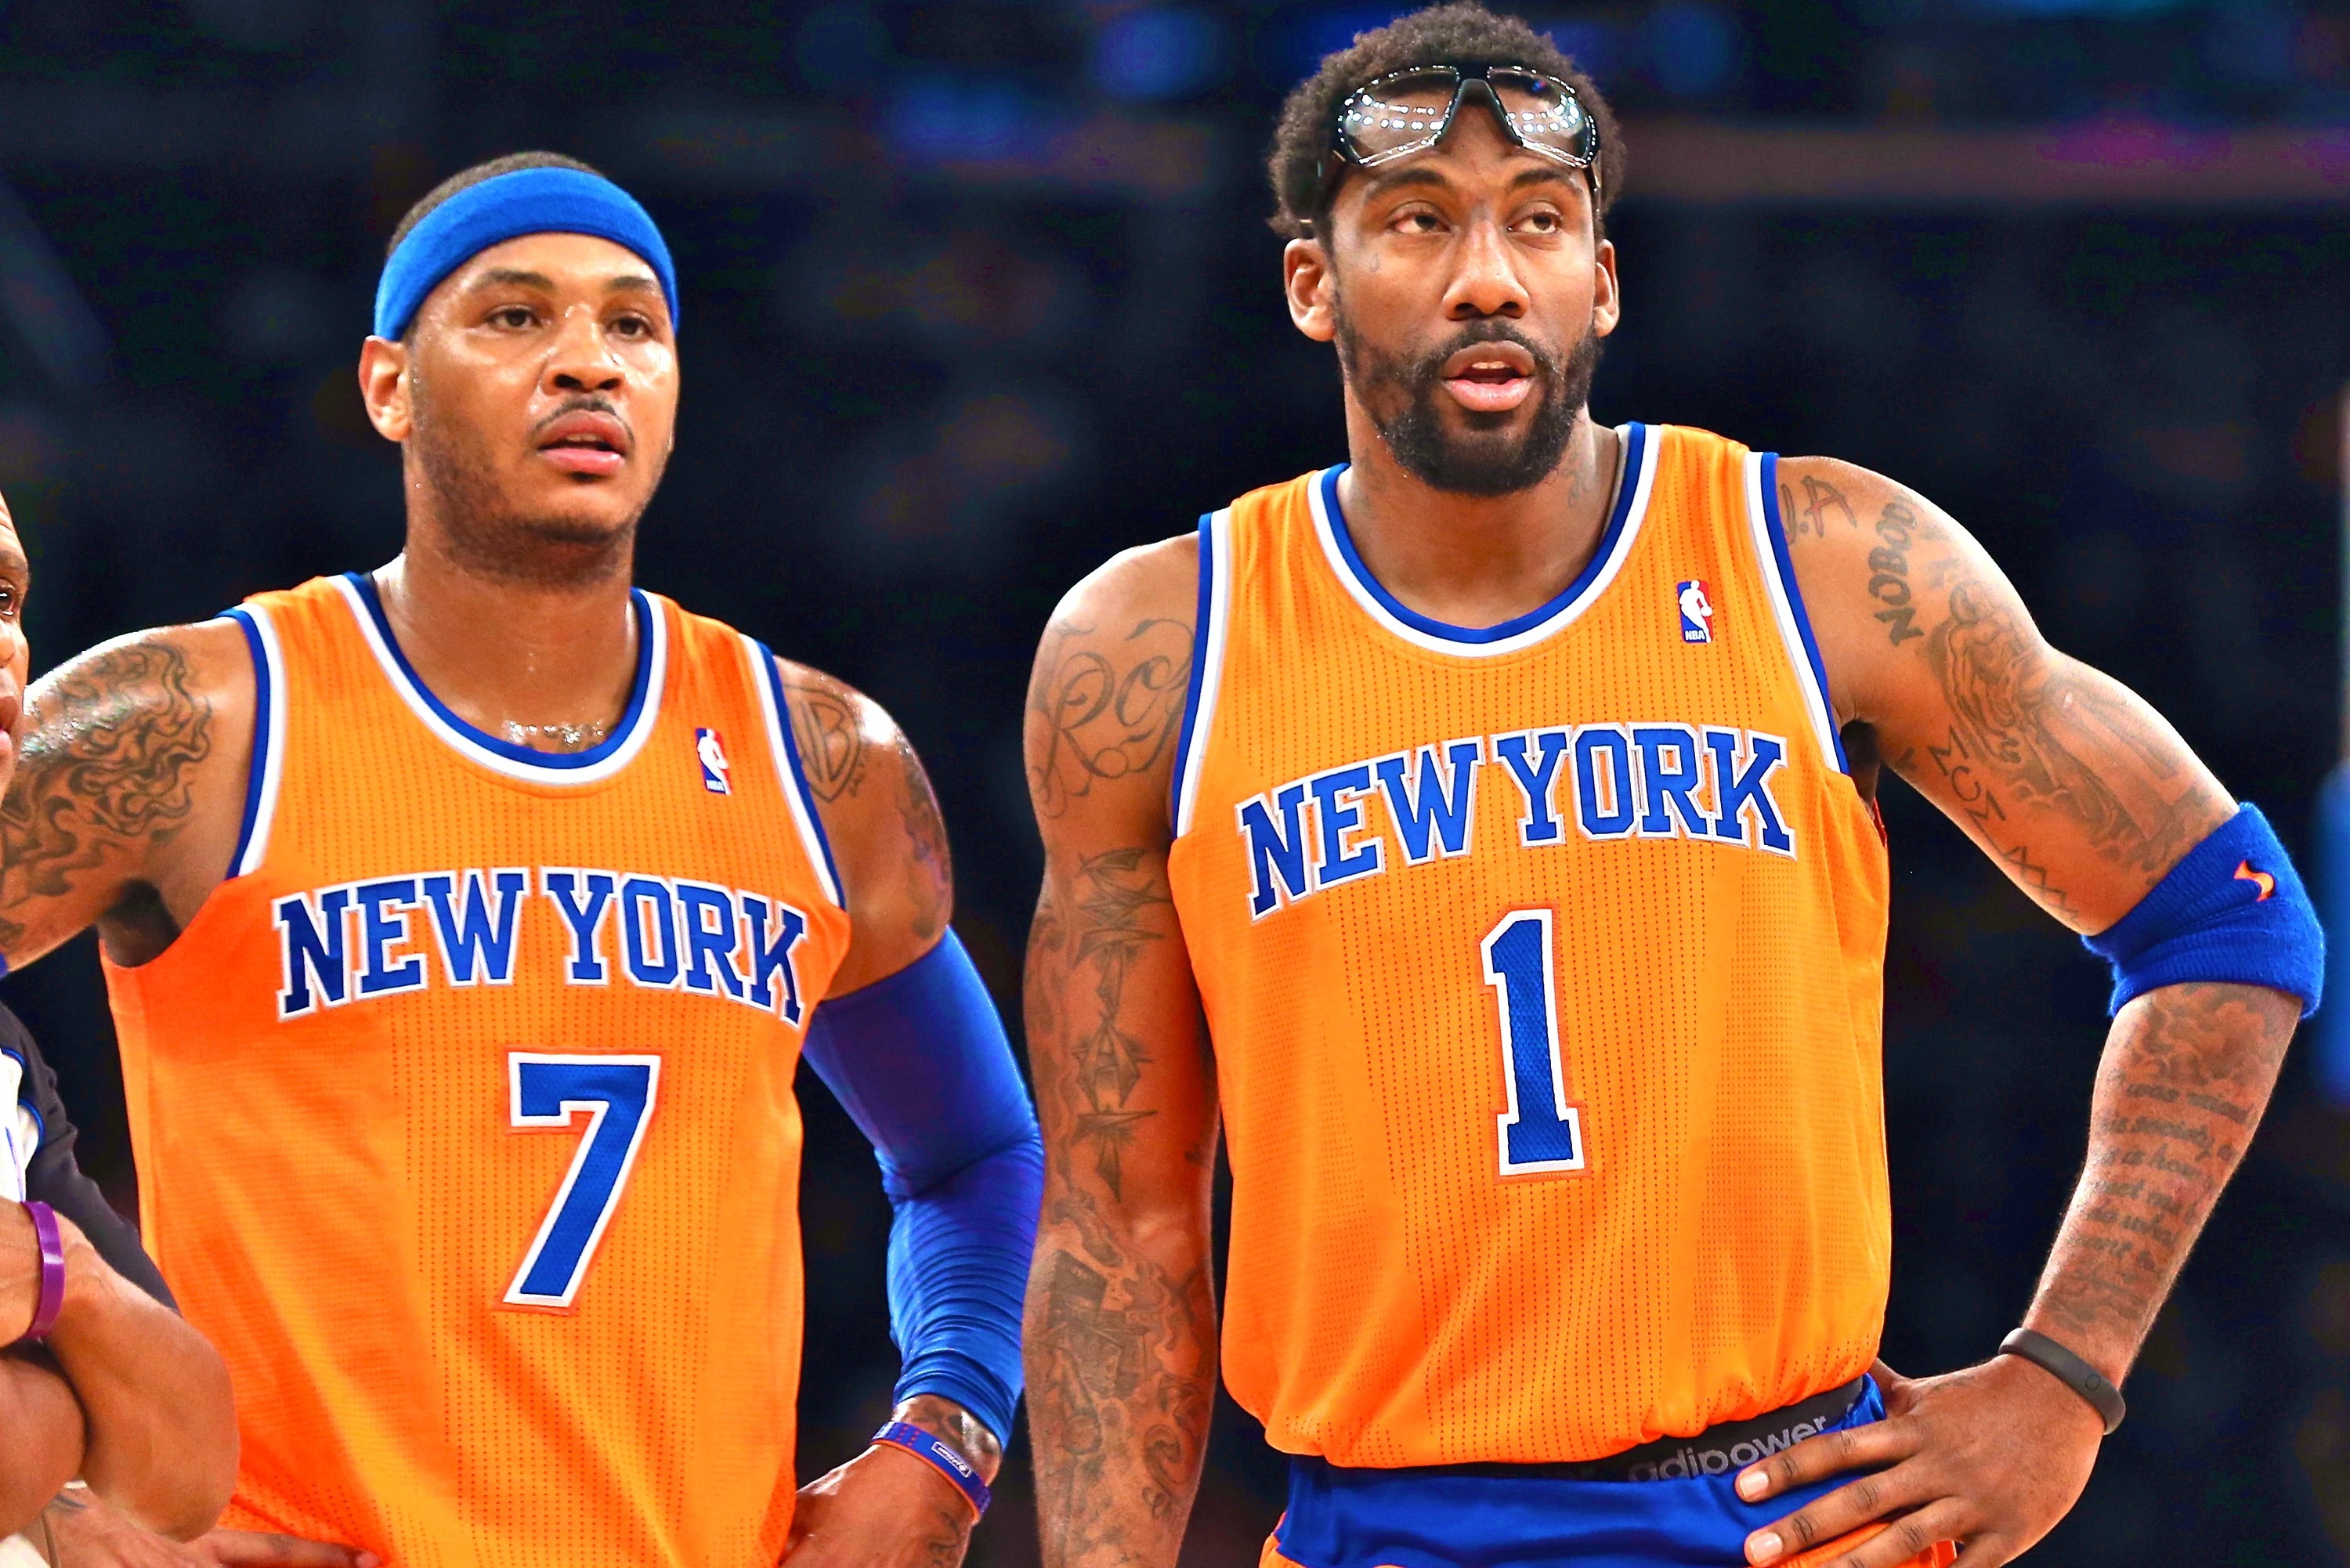 Knicks New Uniforms The new york knicks are the latest team in the